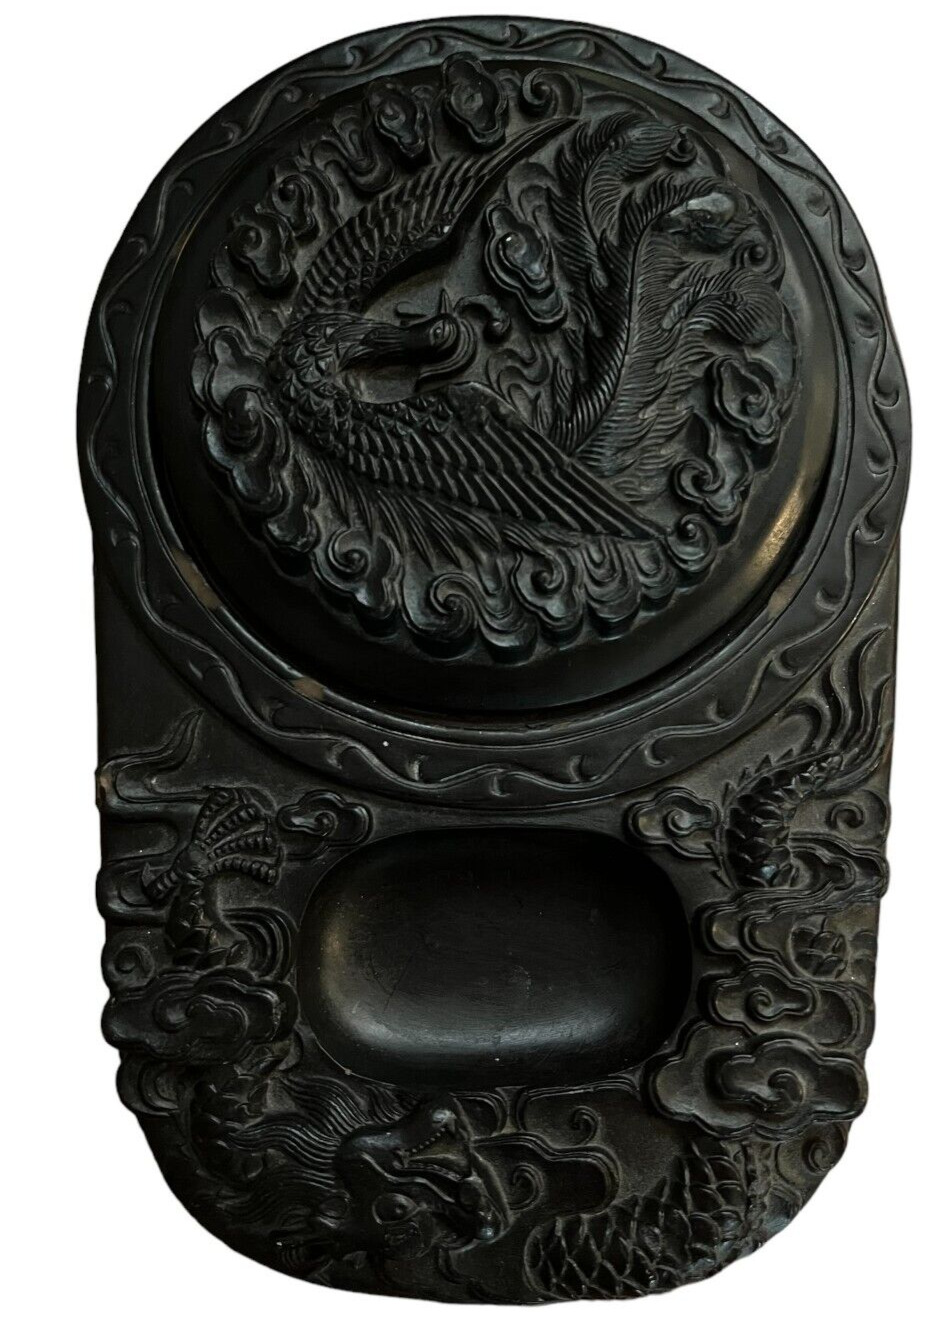 Antique Chinese Ink Well Hand Carved Dragon Ink-stone Phoenix Lid Brush Holder